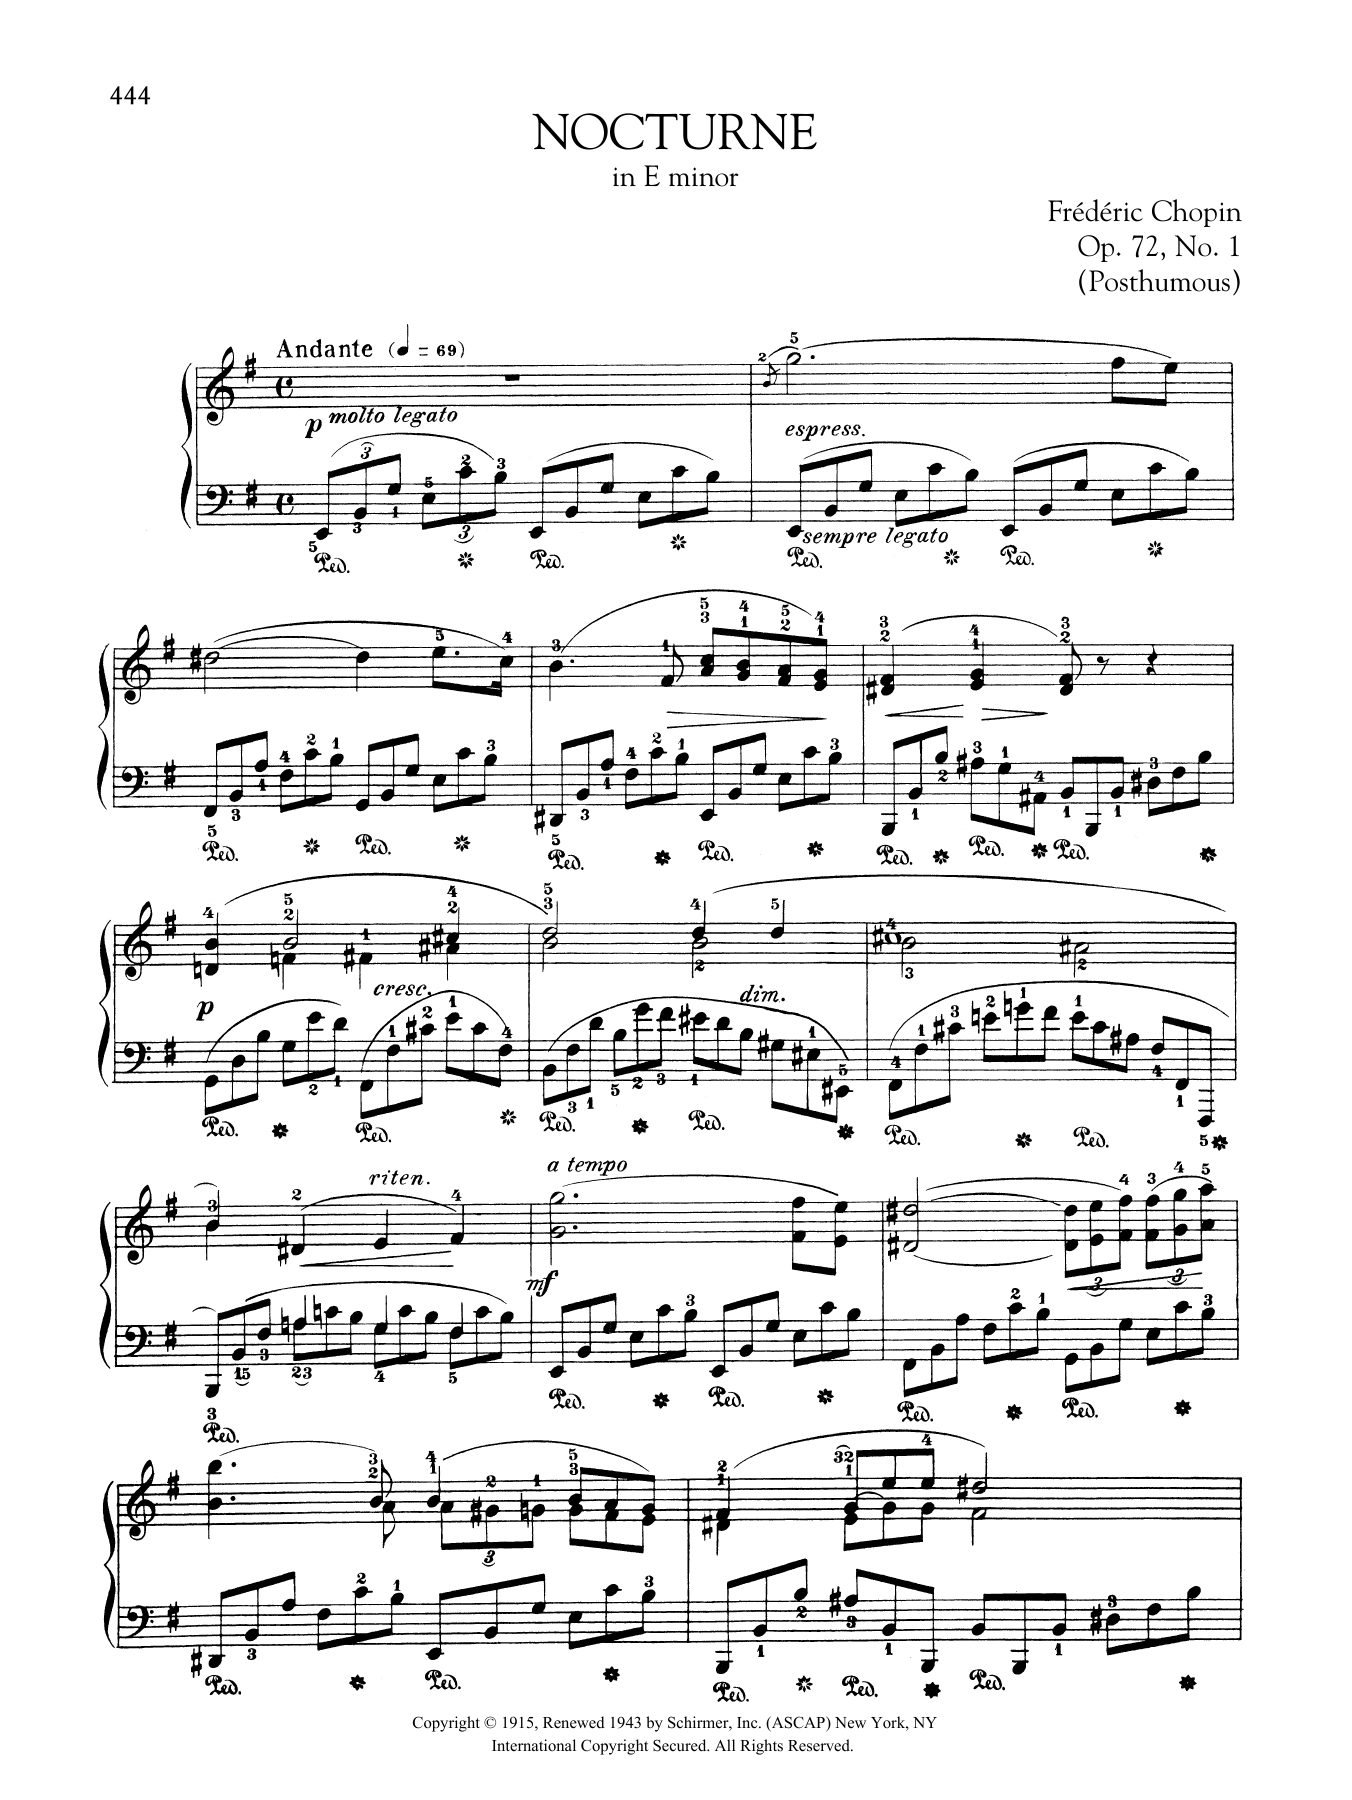 Nocturne in E minor, Op. 72, No. 1 (Posthumous) sheet music